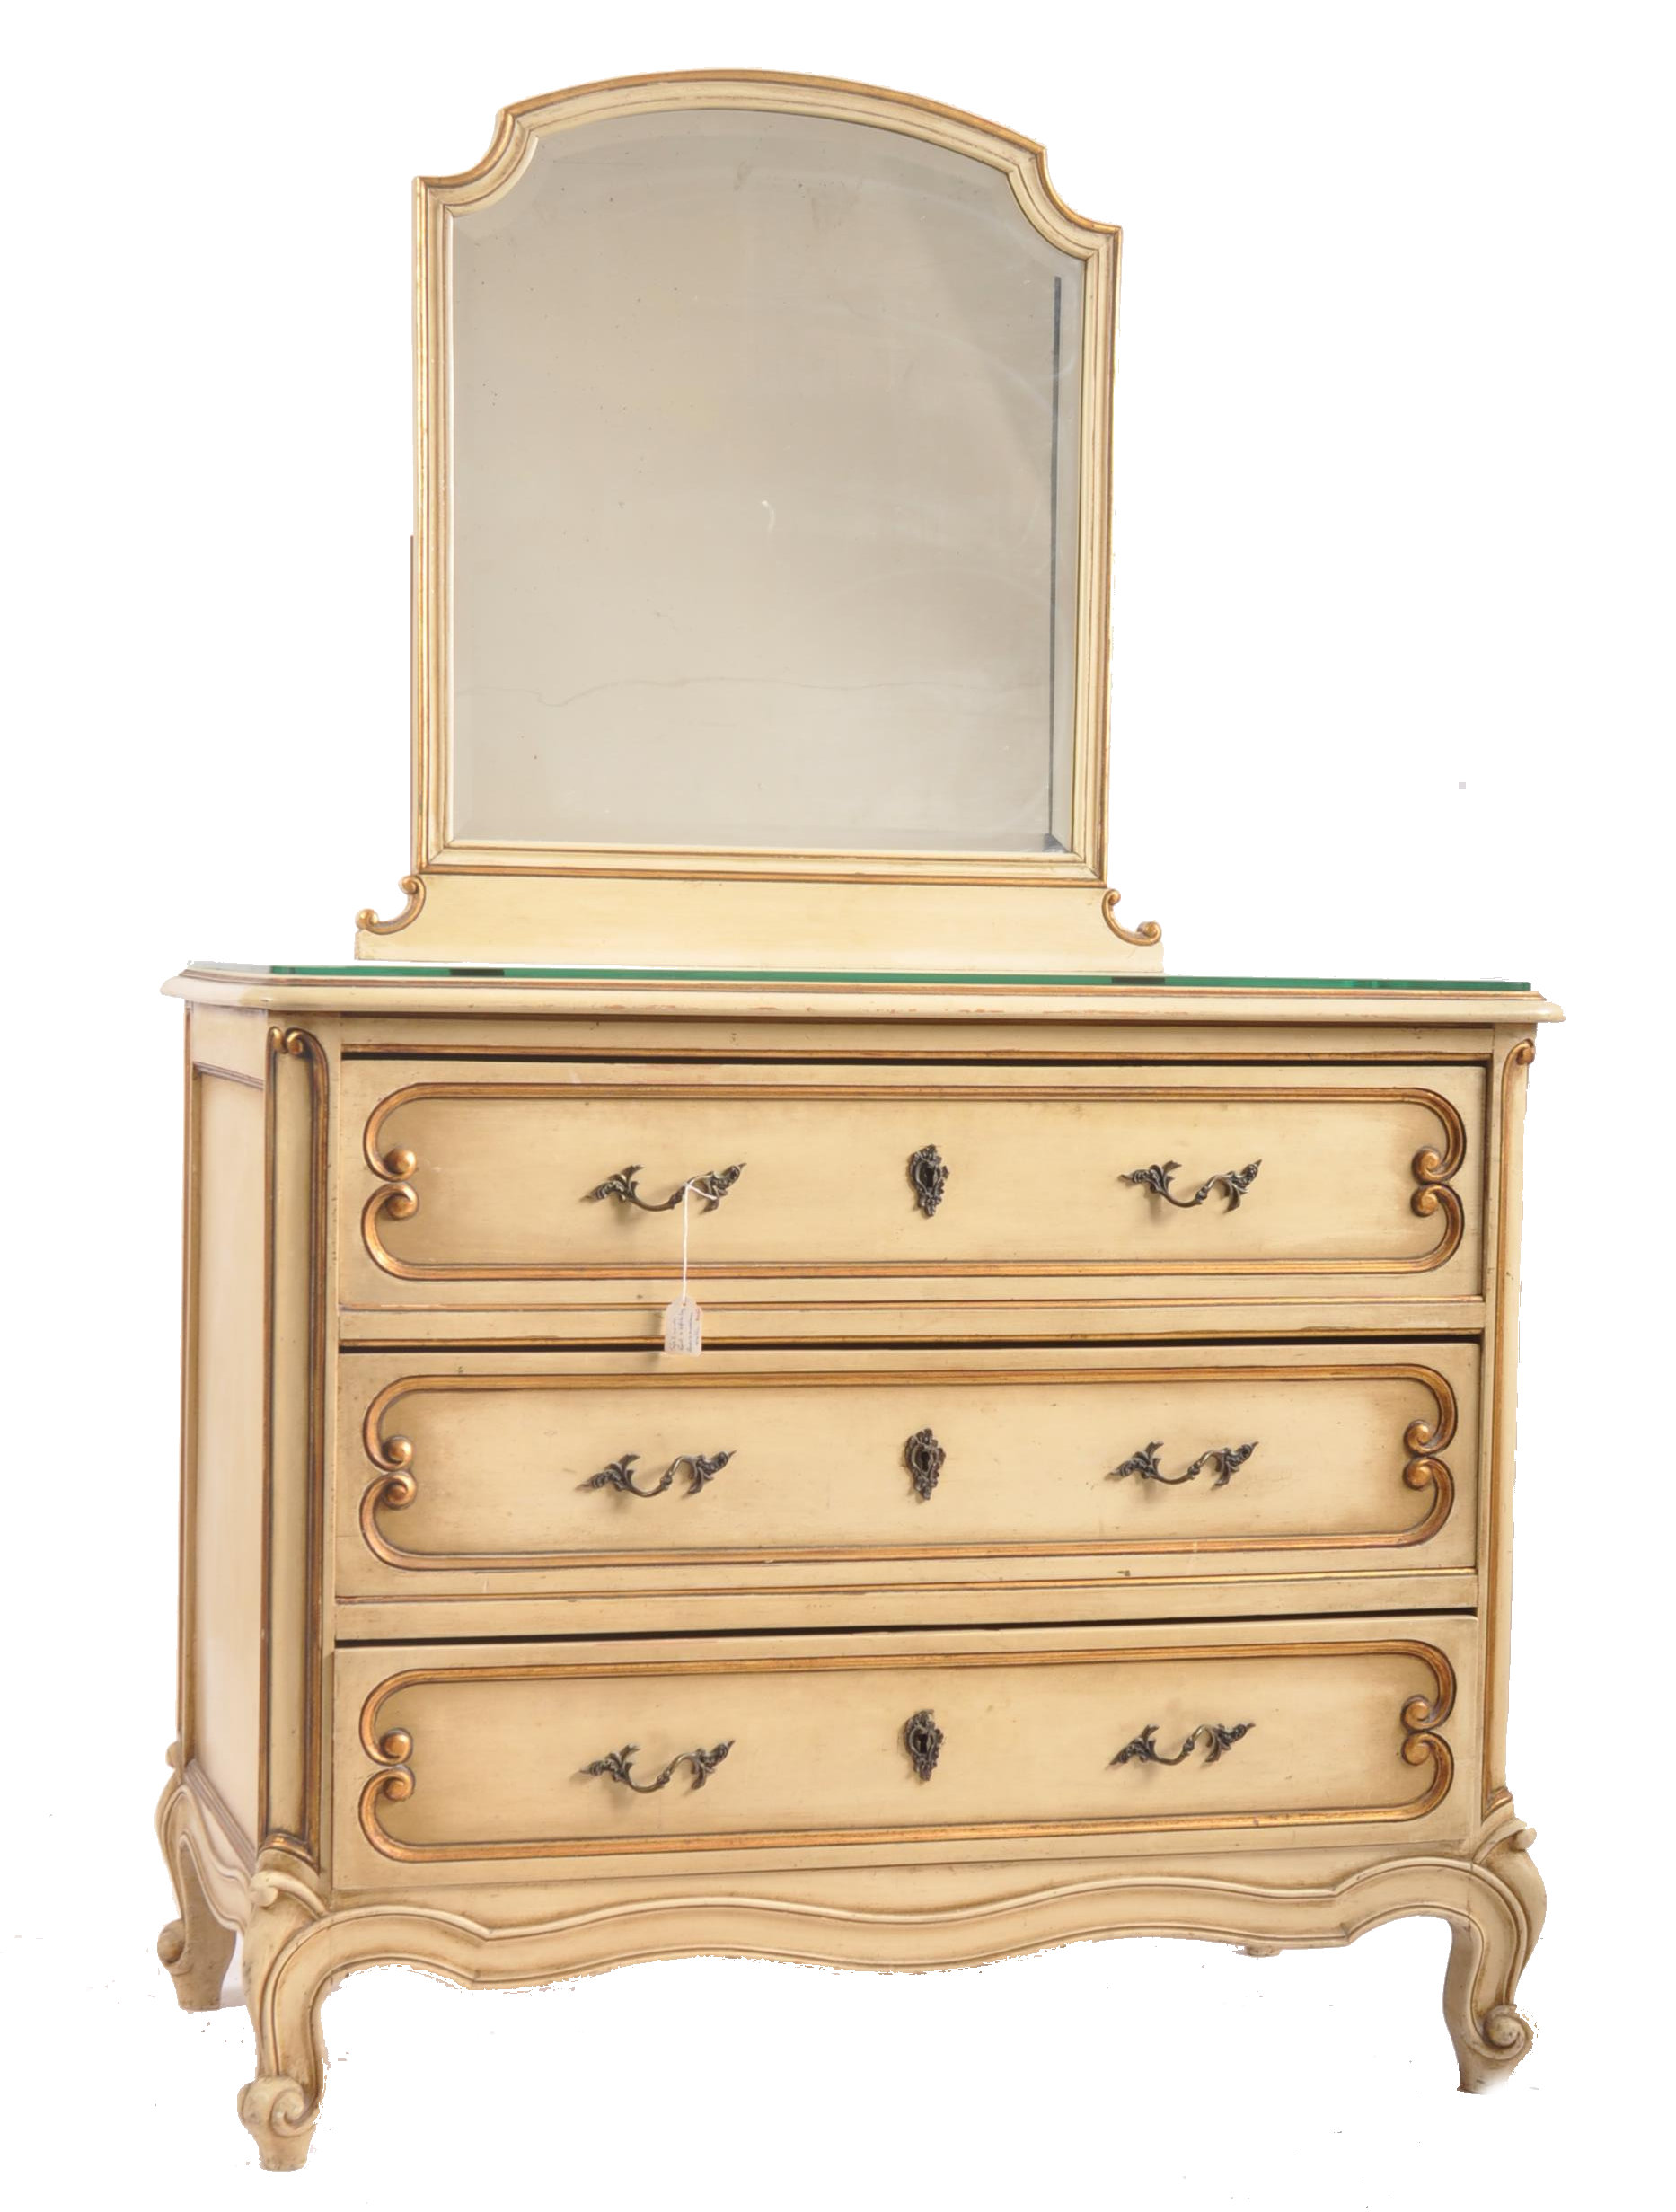 19TH CENTURY PAINTED FRENCH LOUIS XVI DRESSING TABLE CHEST